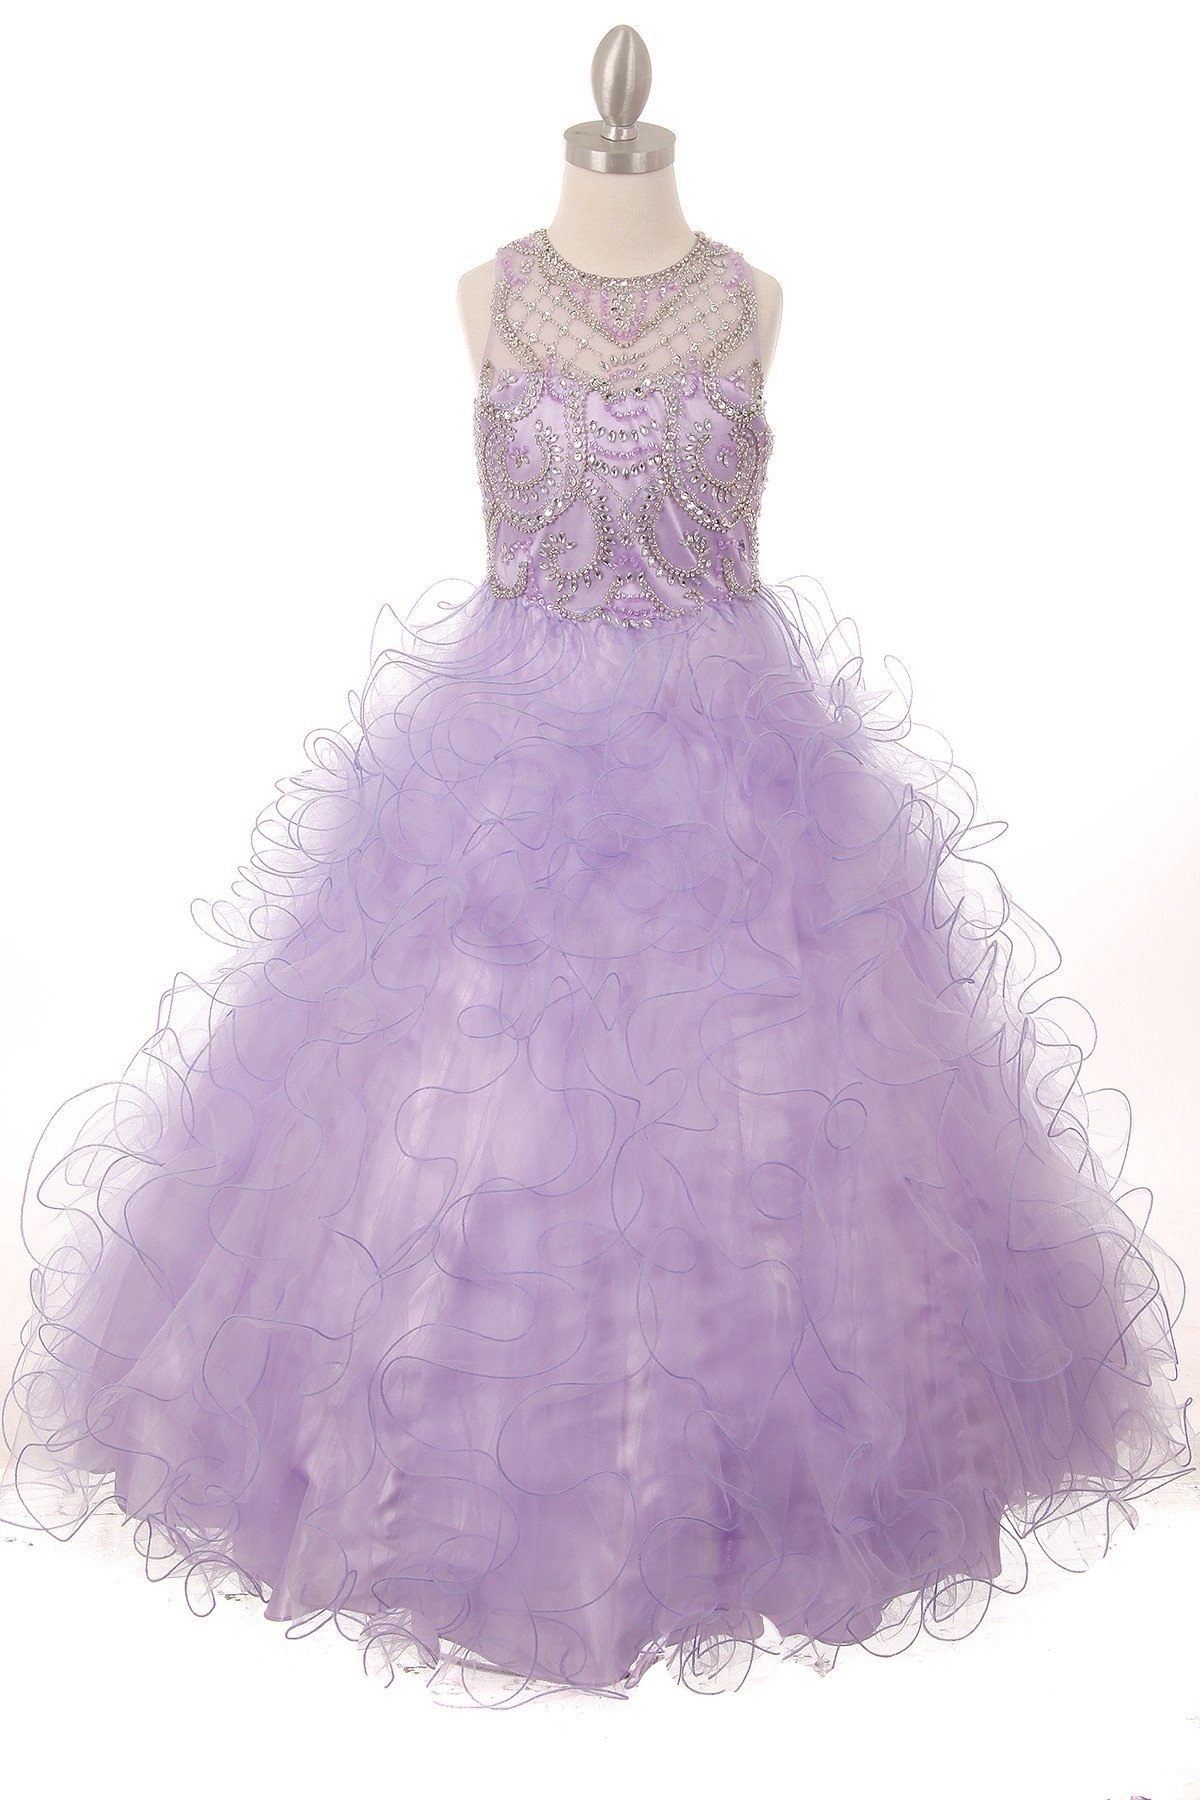 Girls long lilac dress with an illusion neckline, rhinestone beaded bodice and tulle ruffle ball gown skirt.